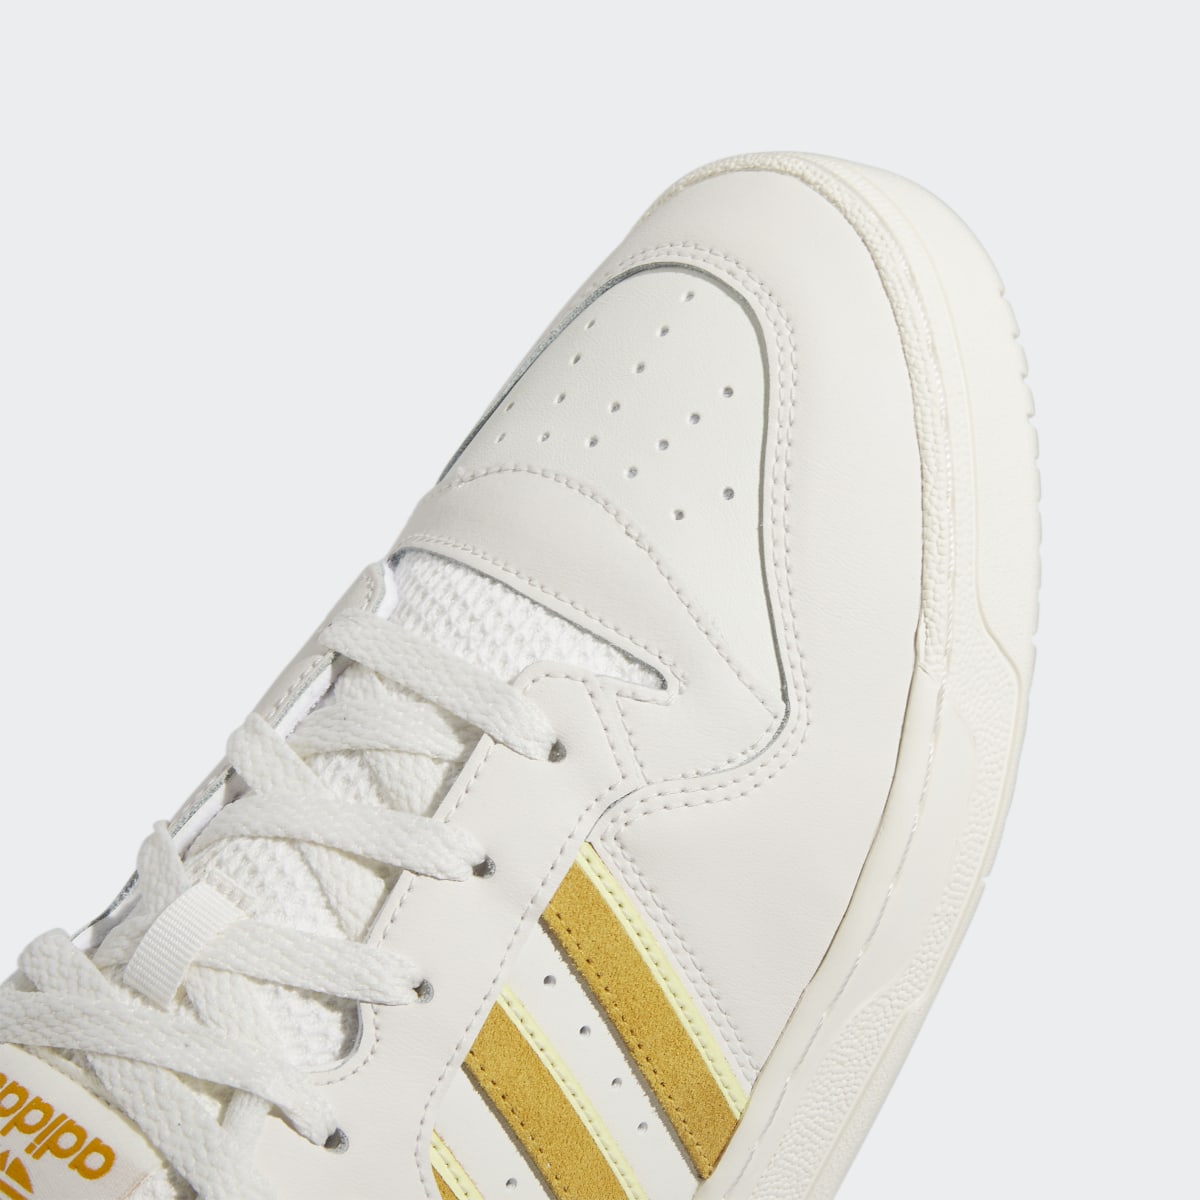 Adidas Rivalry Low Shoes. 9